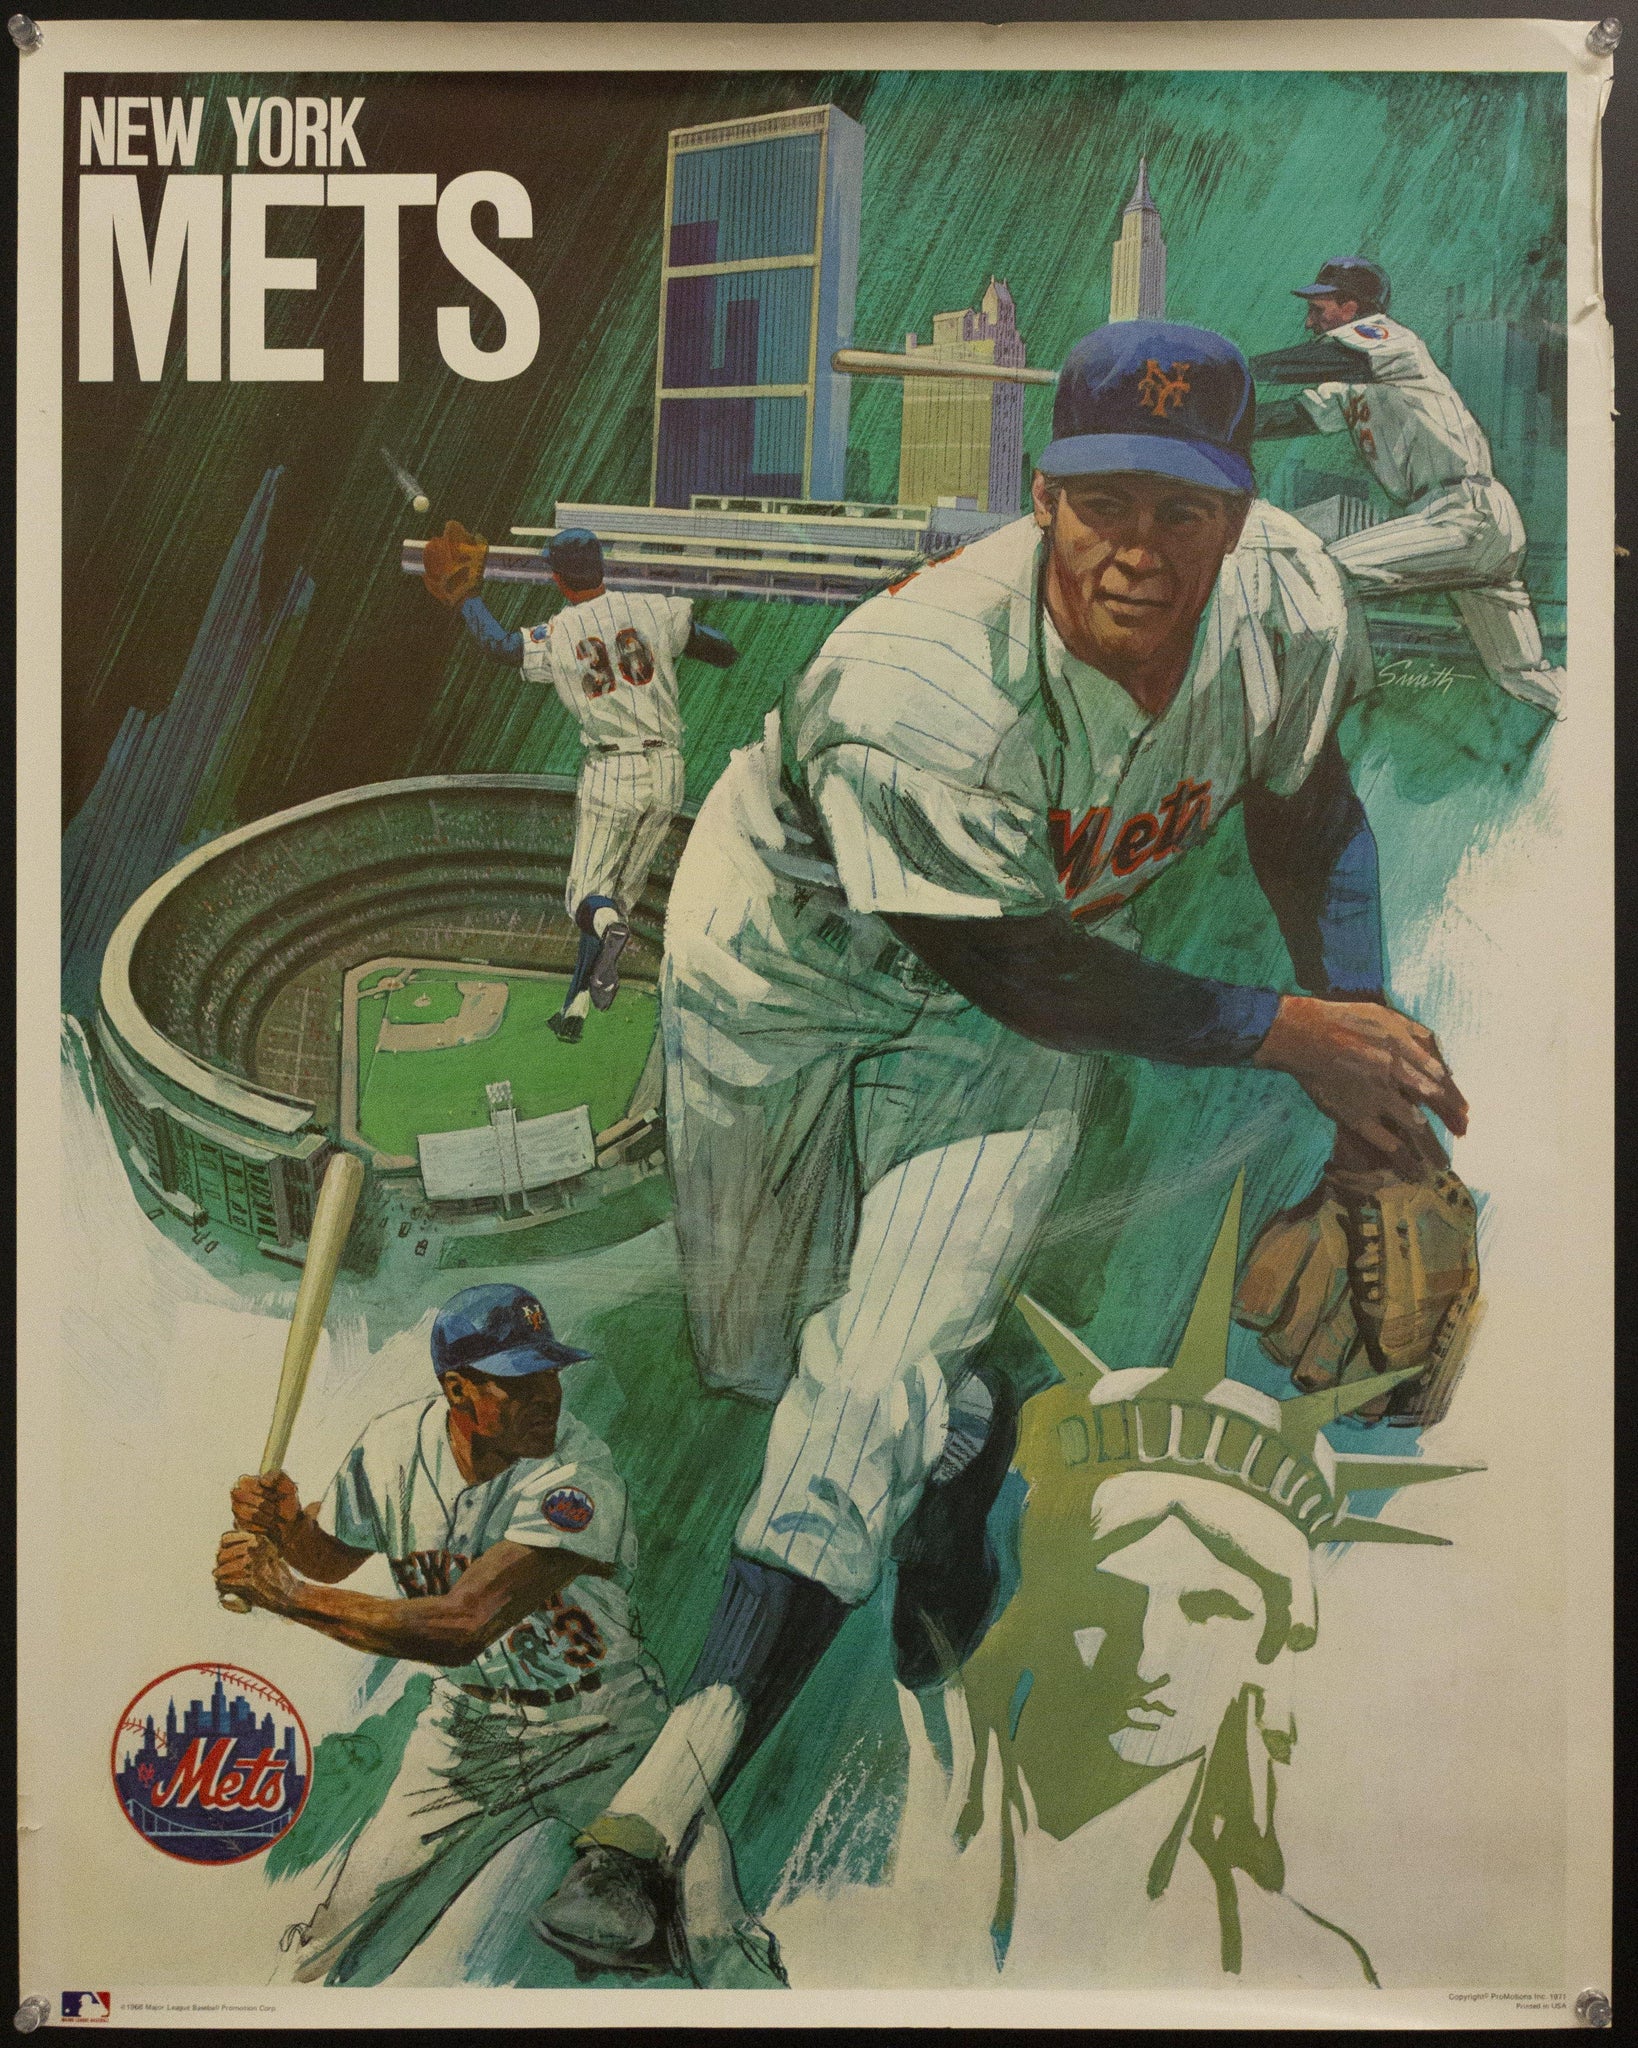 1971 New York Mets by Smith Major League Baseball MLB 1968 - Golden Age Posters